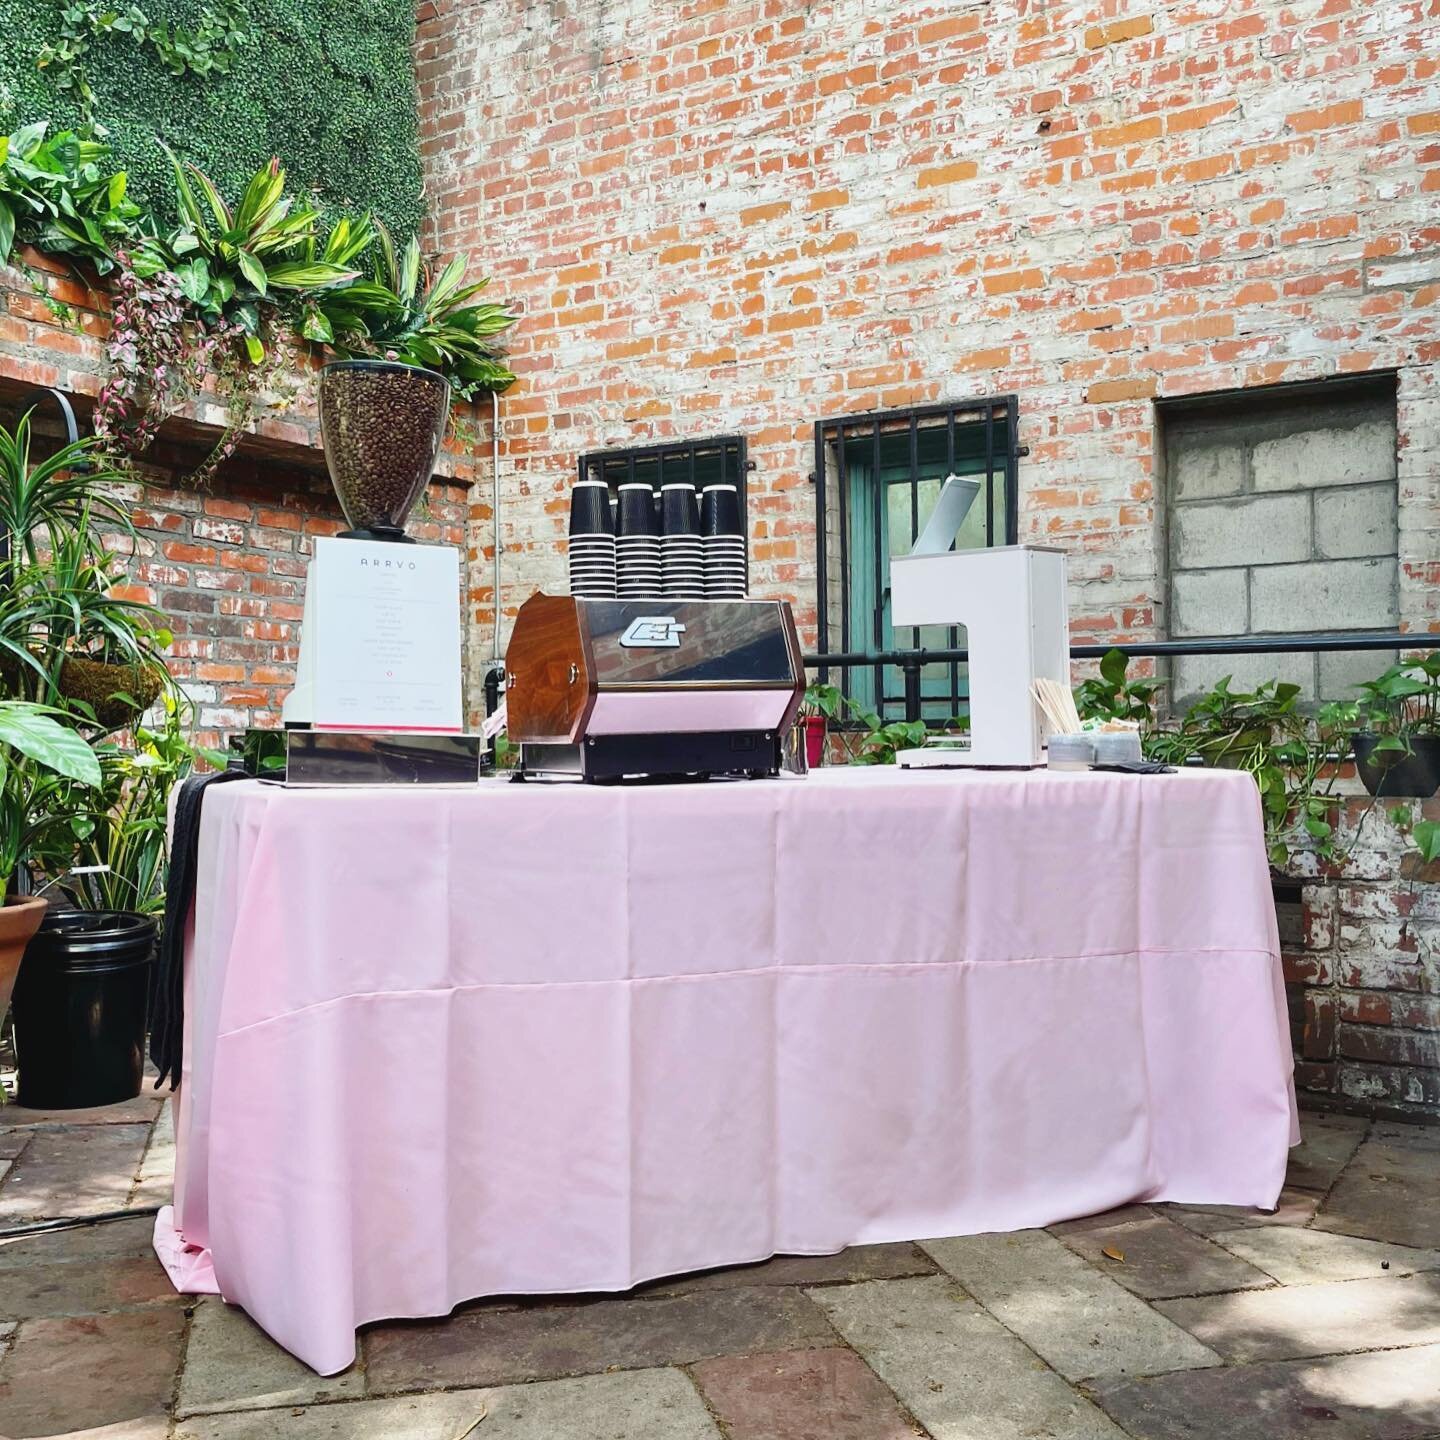 ✨Pretty in Pink! ✨ Nothing beats a lovely cosmetic launch by the talented @ludimdesign for @keniaobeauty. Thanks for letting us in on the fun and congrats on the big day! 😍💕
.
.
.
.
#arrvo #coffee #losangeles #california #smallbusiness #catering #m